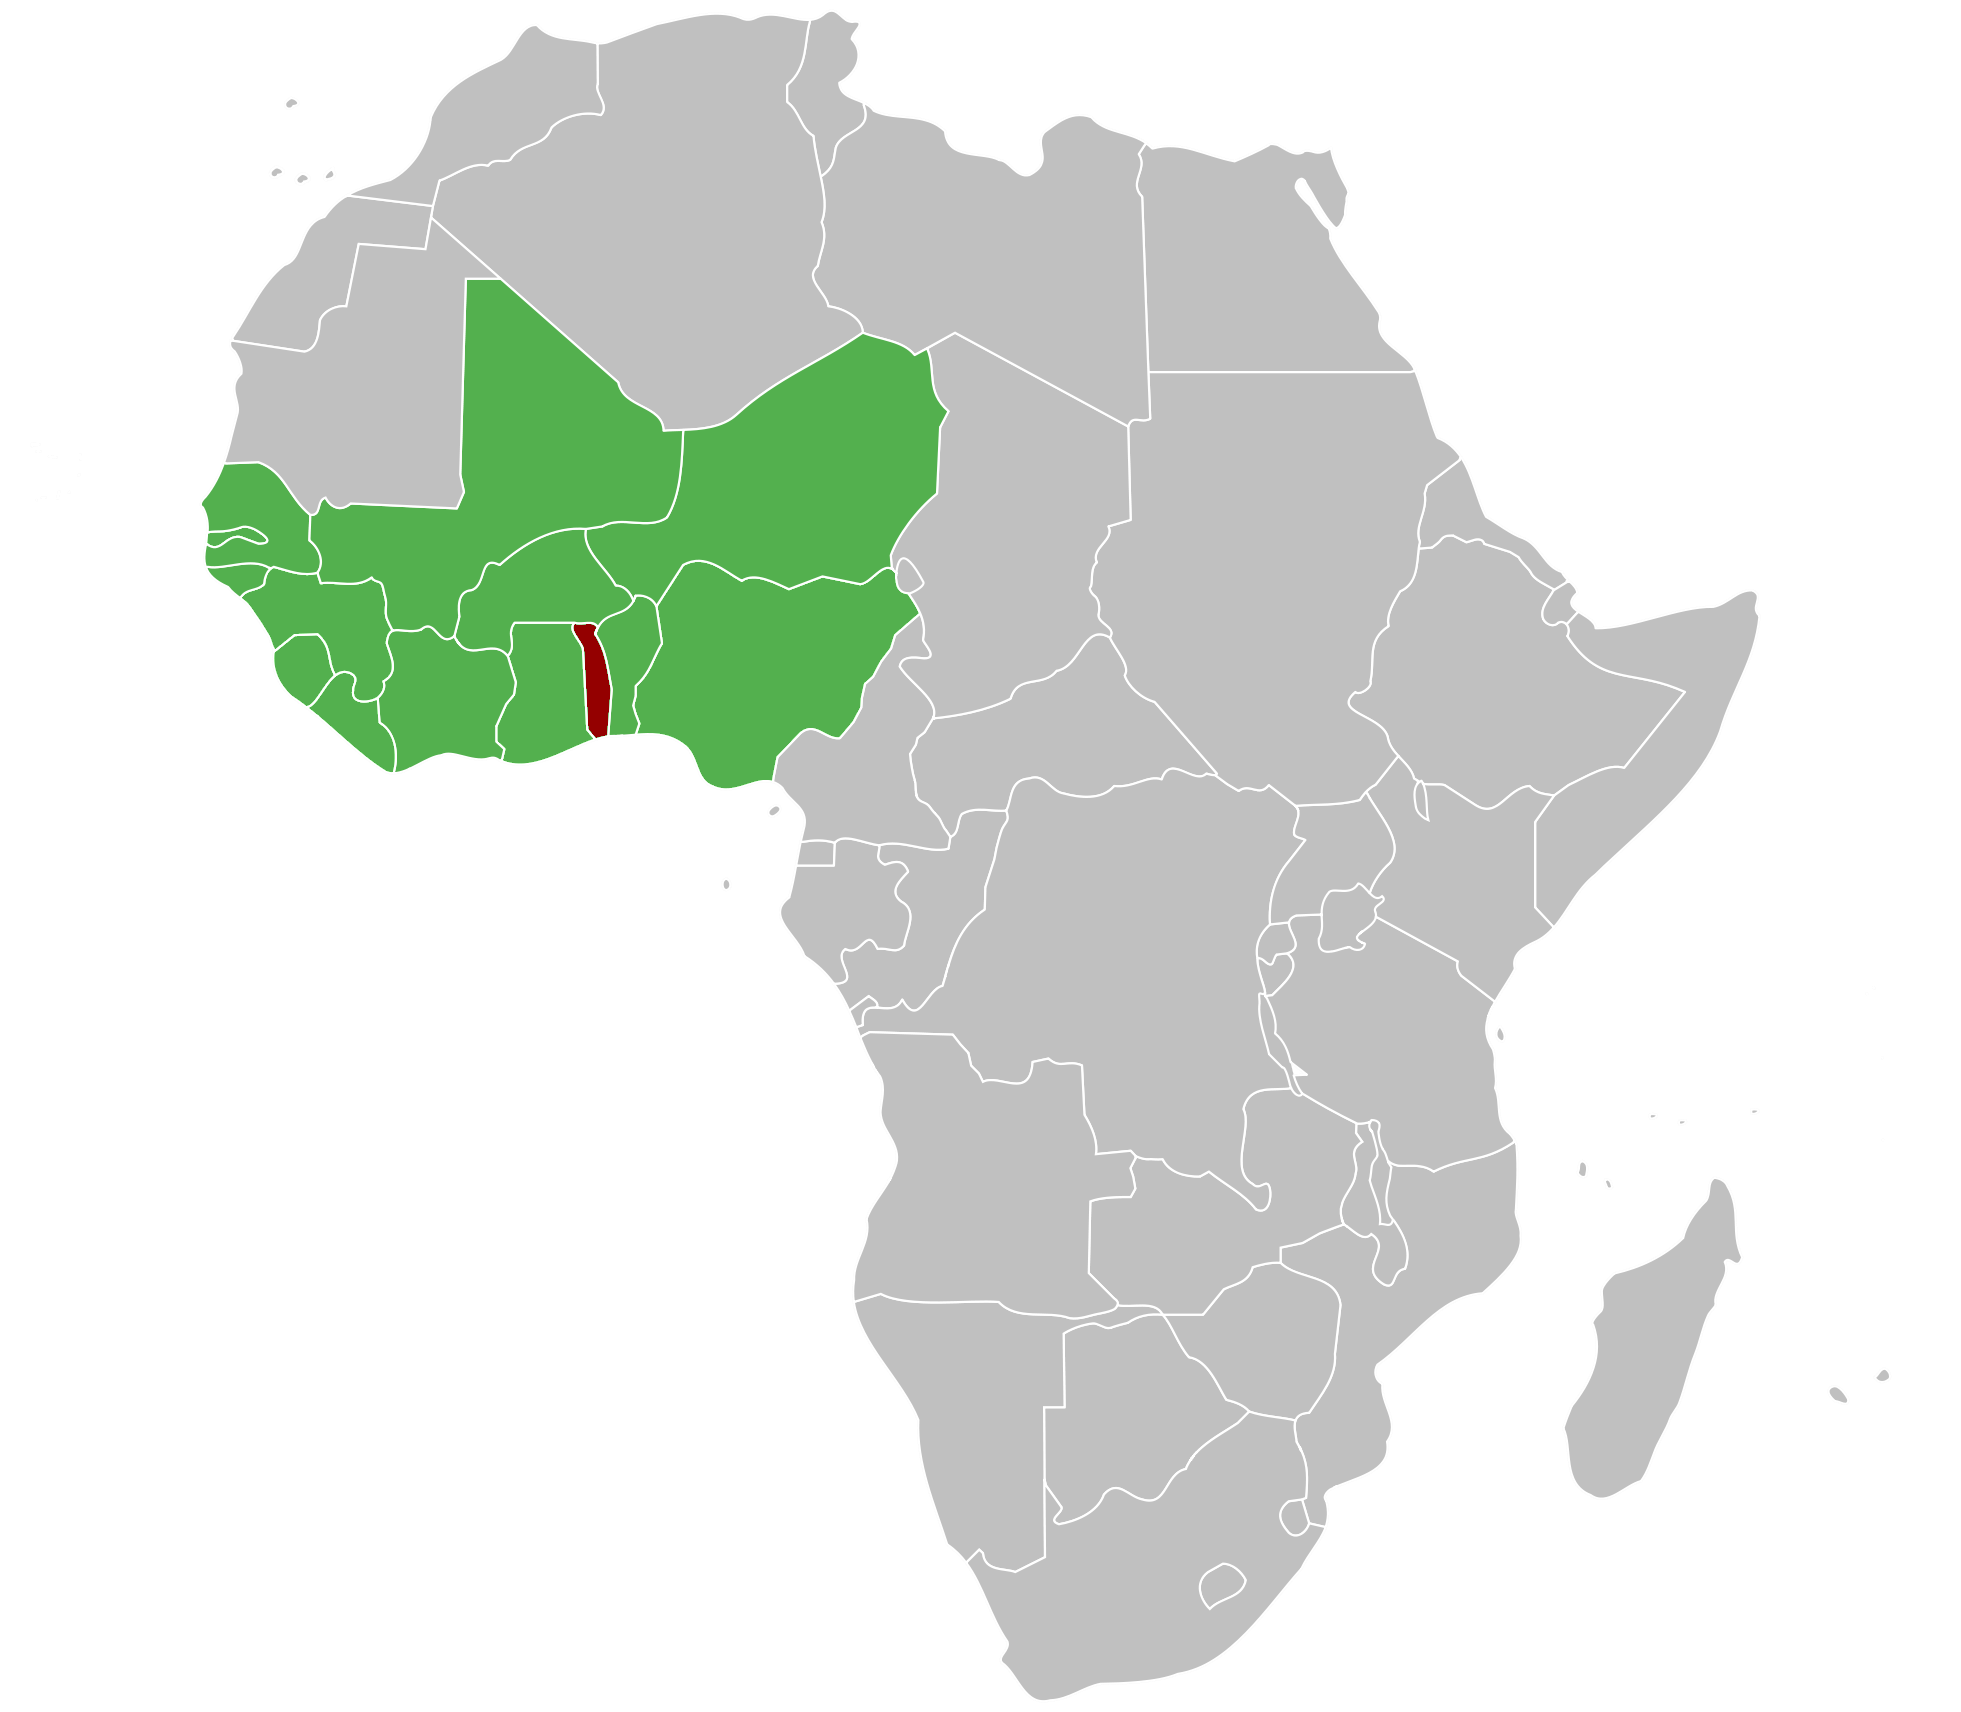 ECOWAS countries (green) with Togo (red).